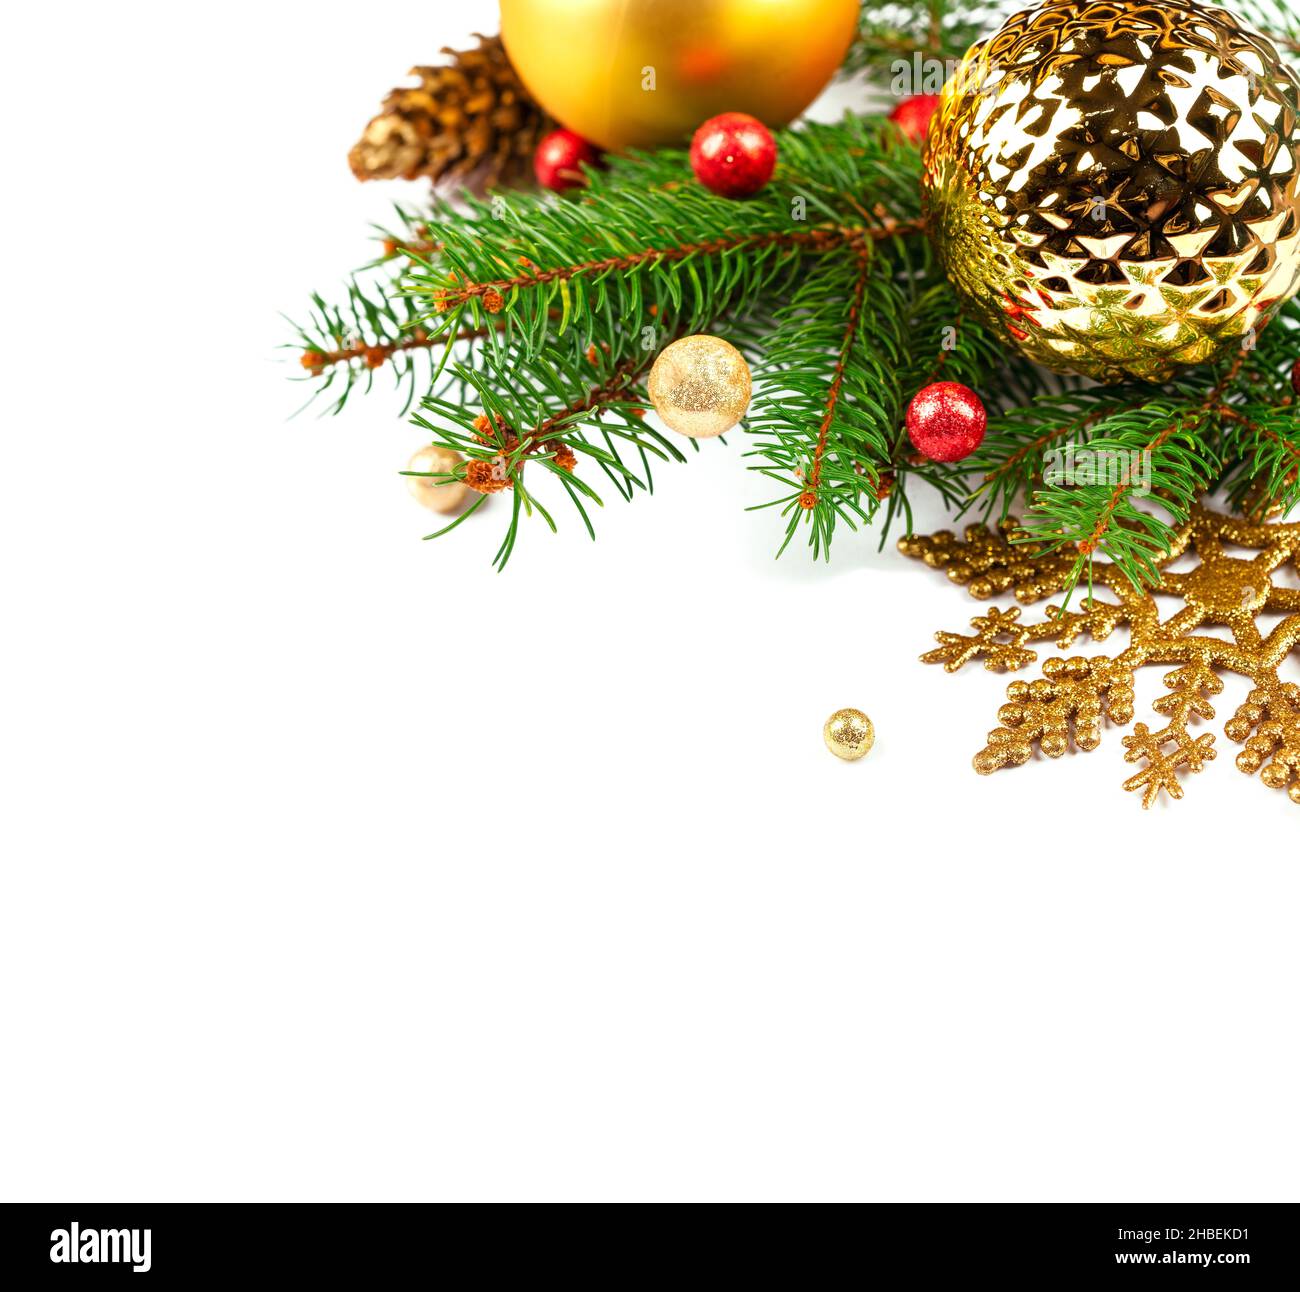 Christmas fir decoration with Christmas baubles, pinecone and snowflake ornament Stock Photo